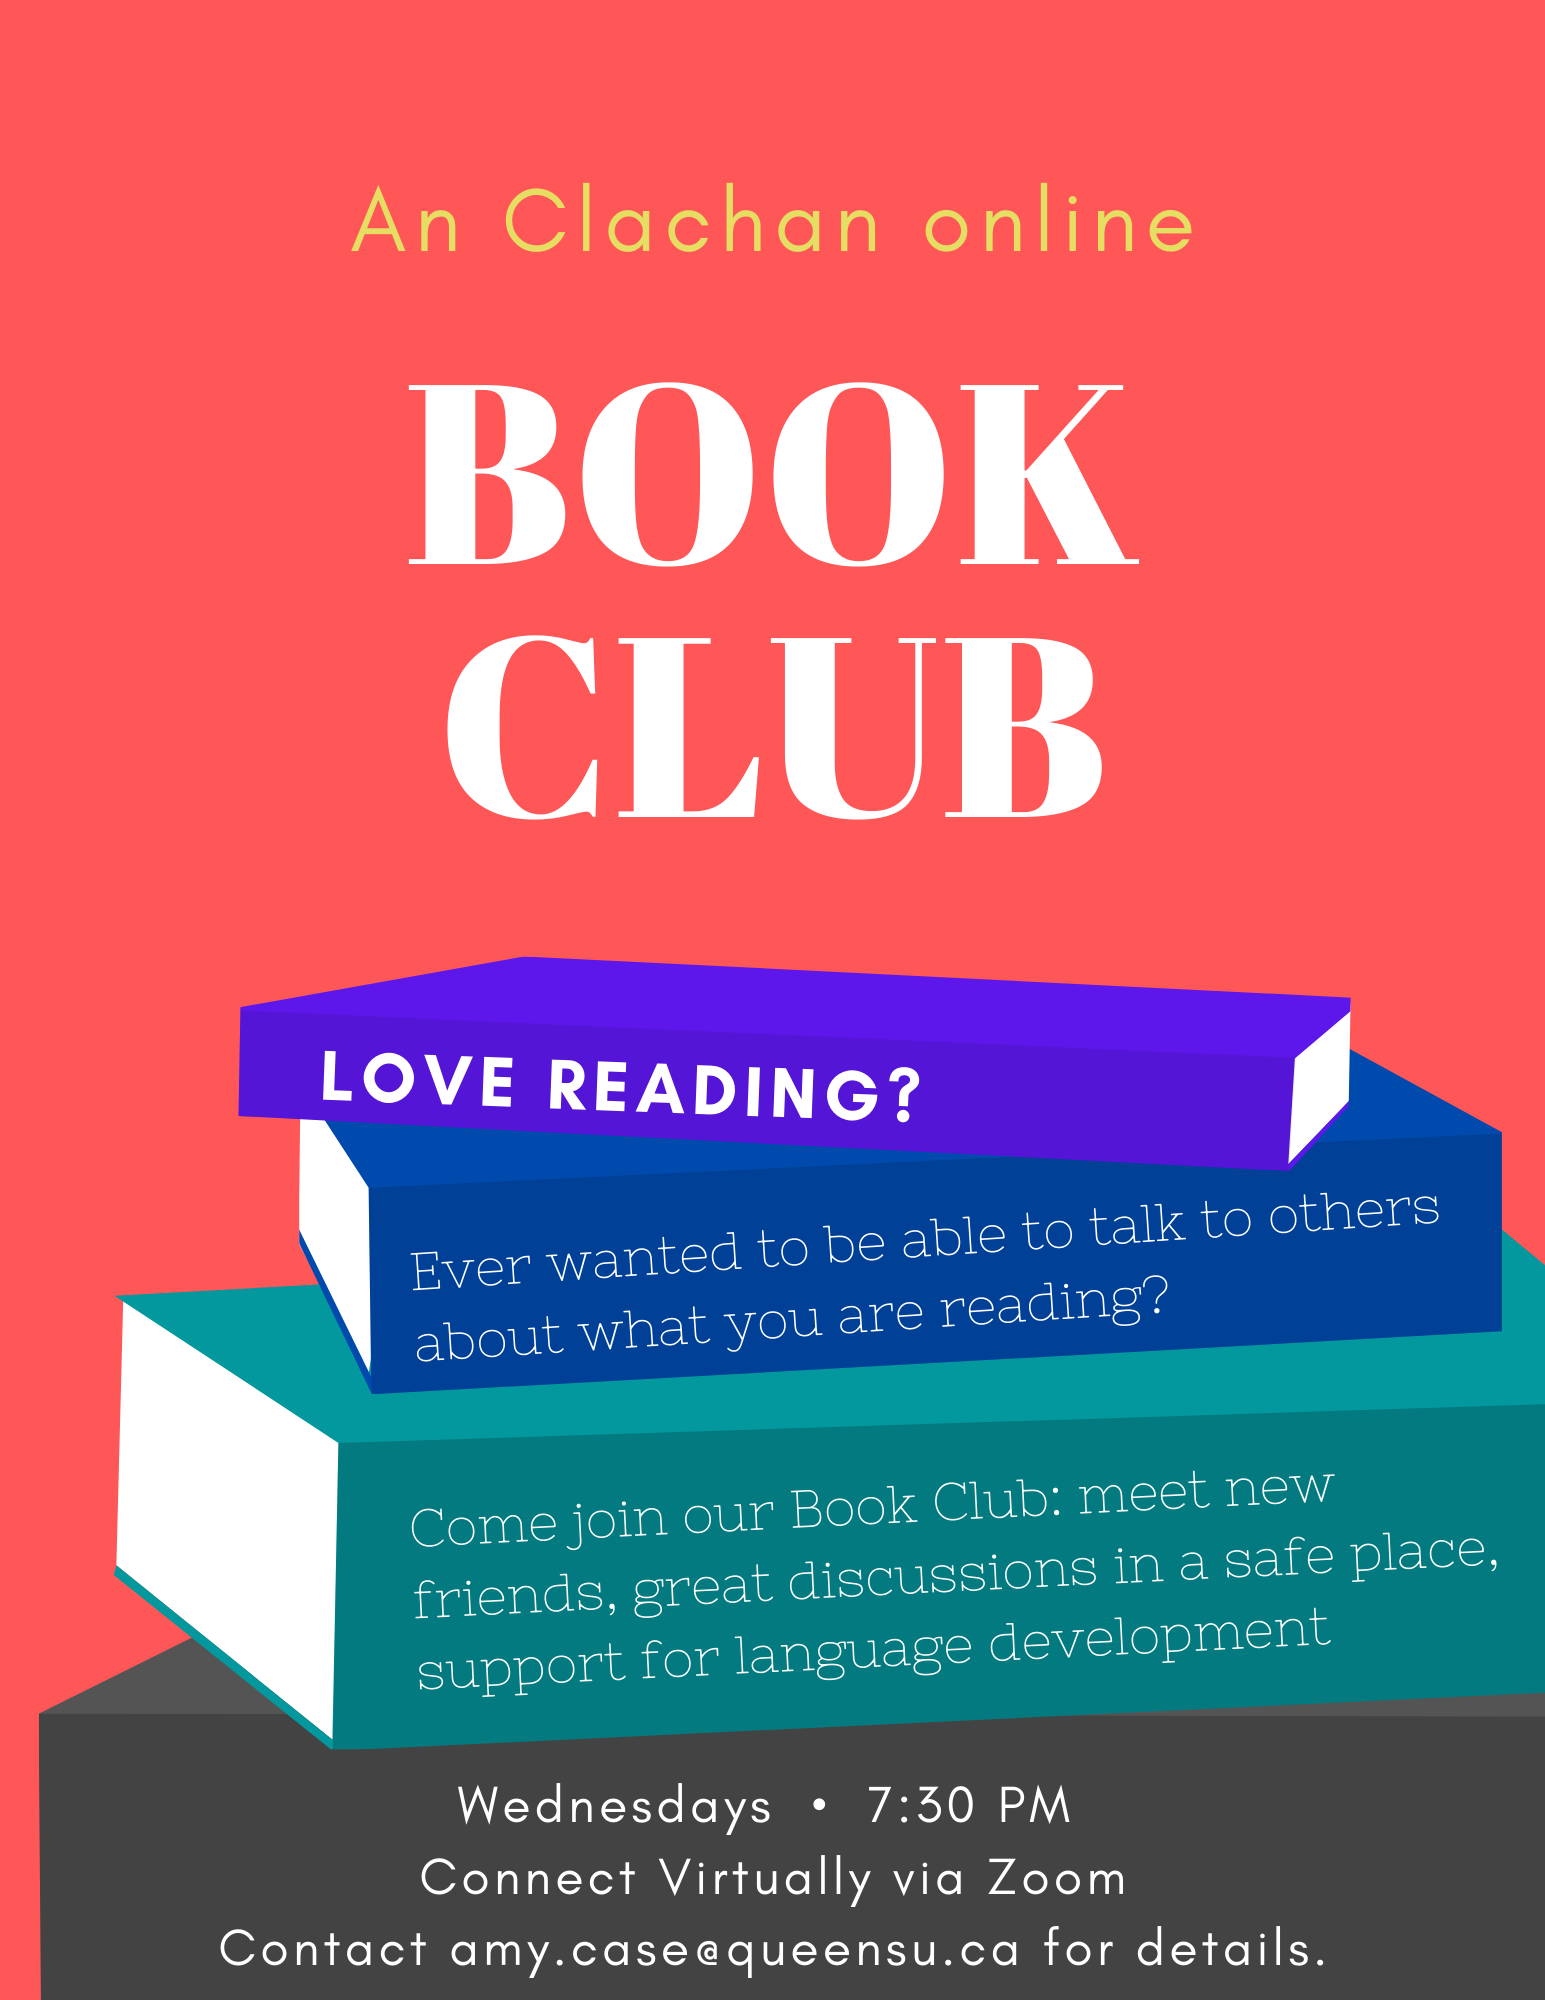 How To Find A (Fantastic) Book Club Near You To Join